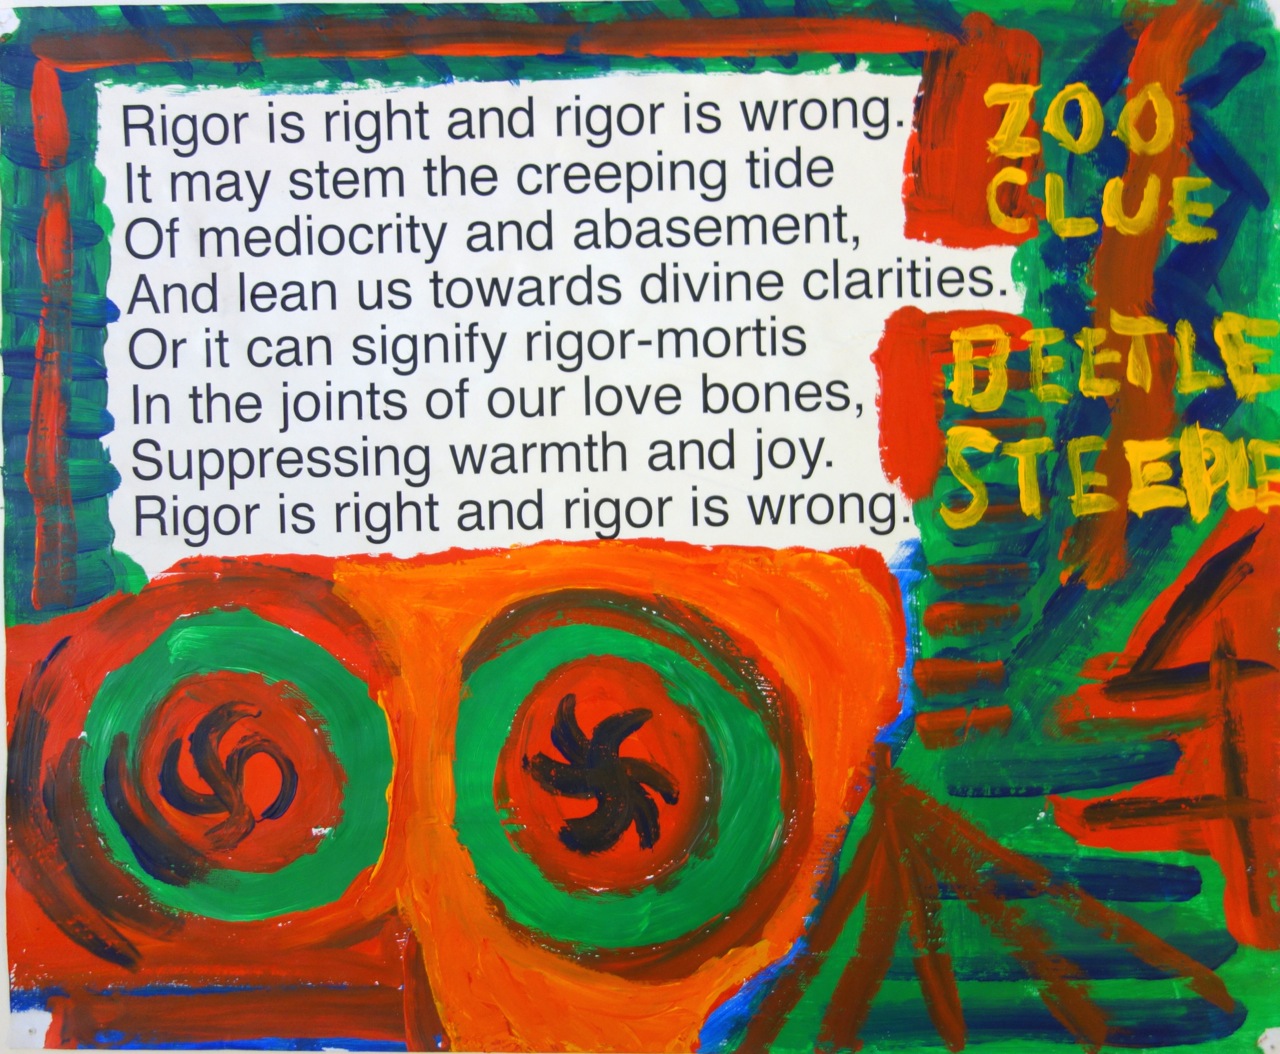 Rigor is Right and Rigor is Wrong